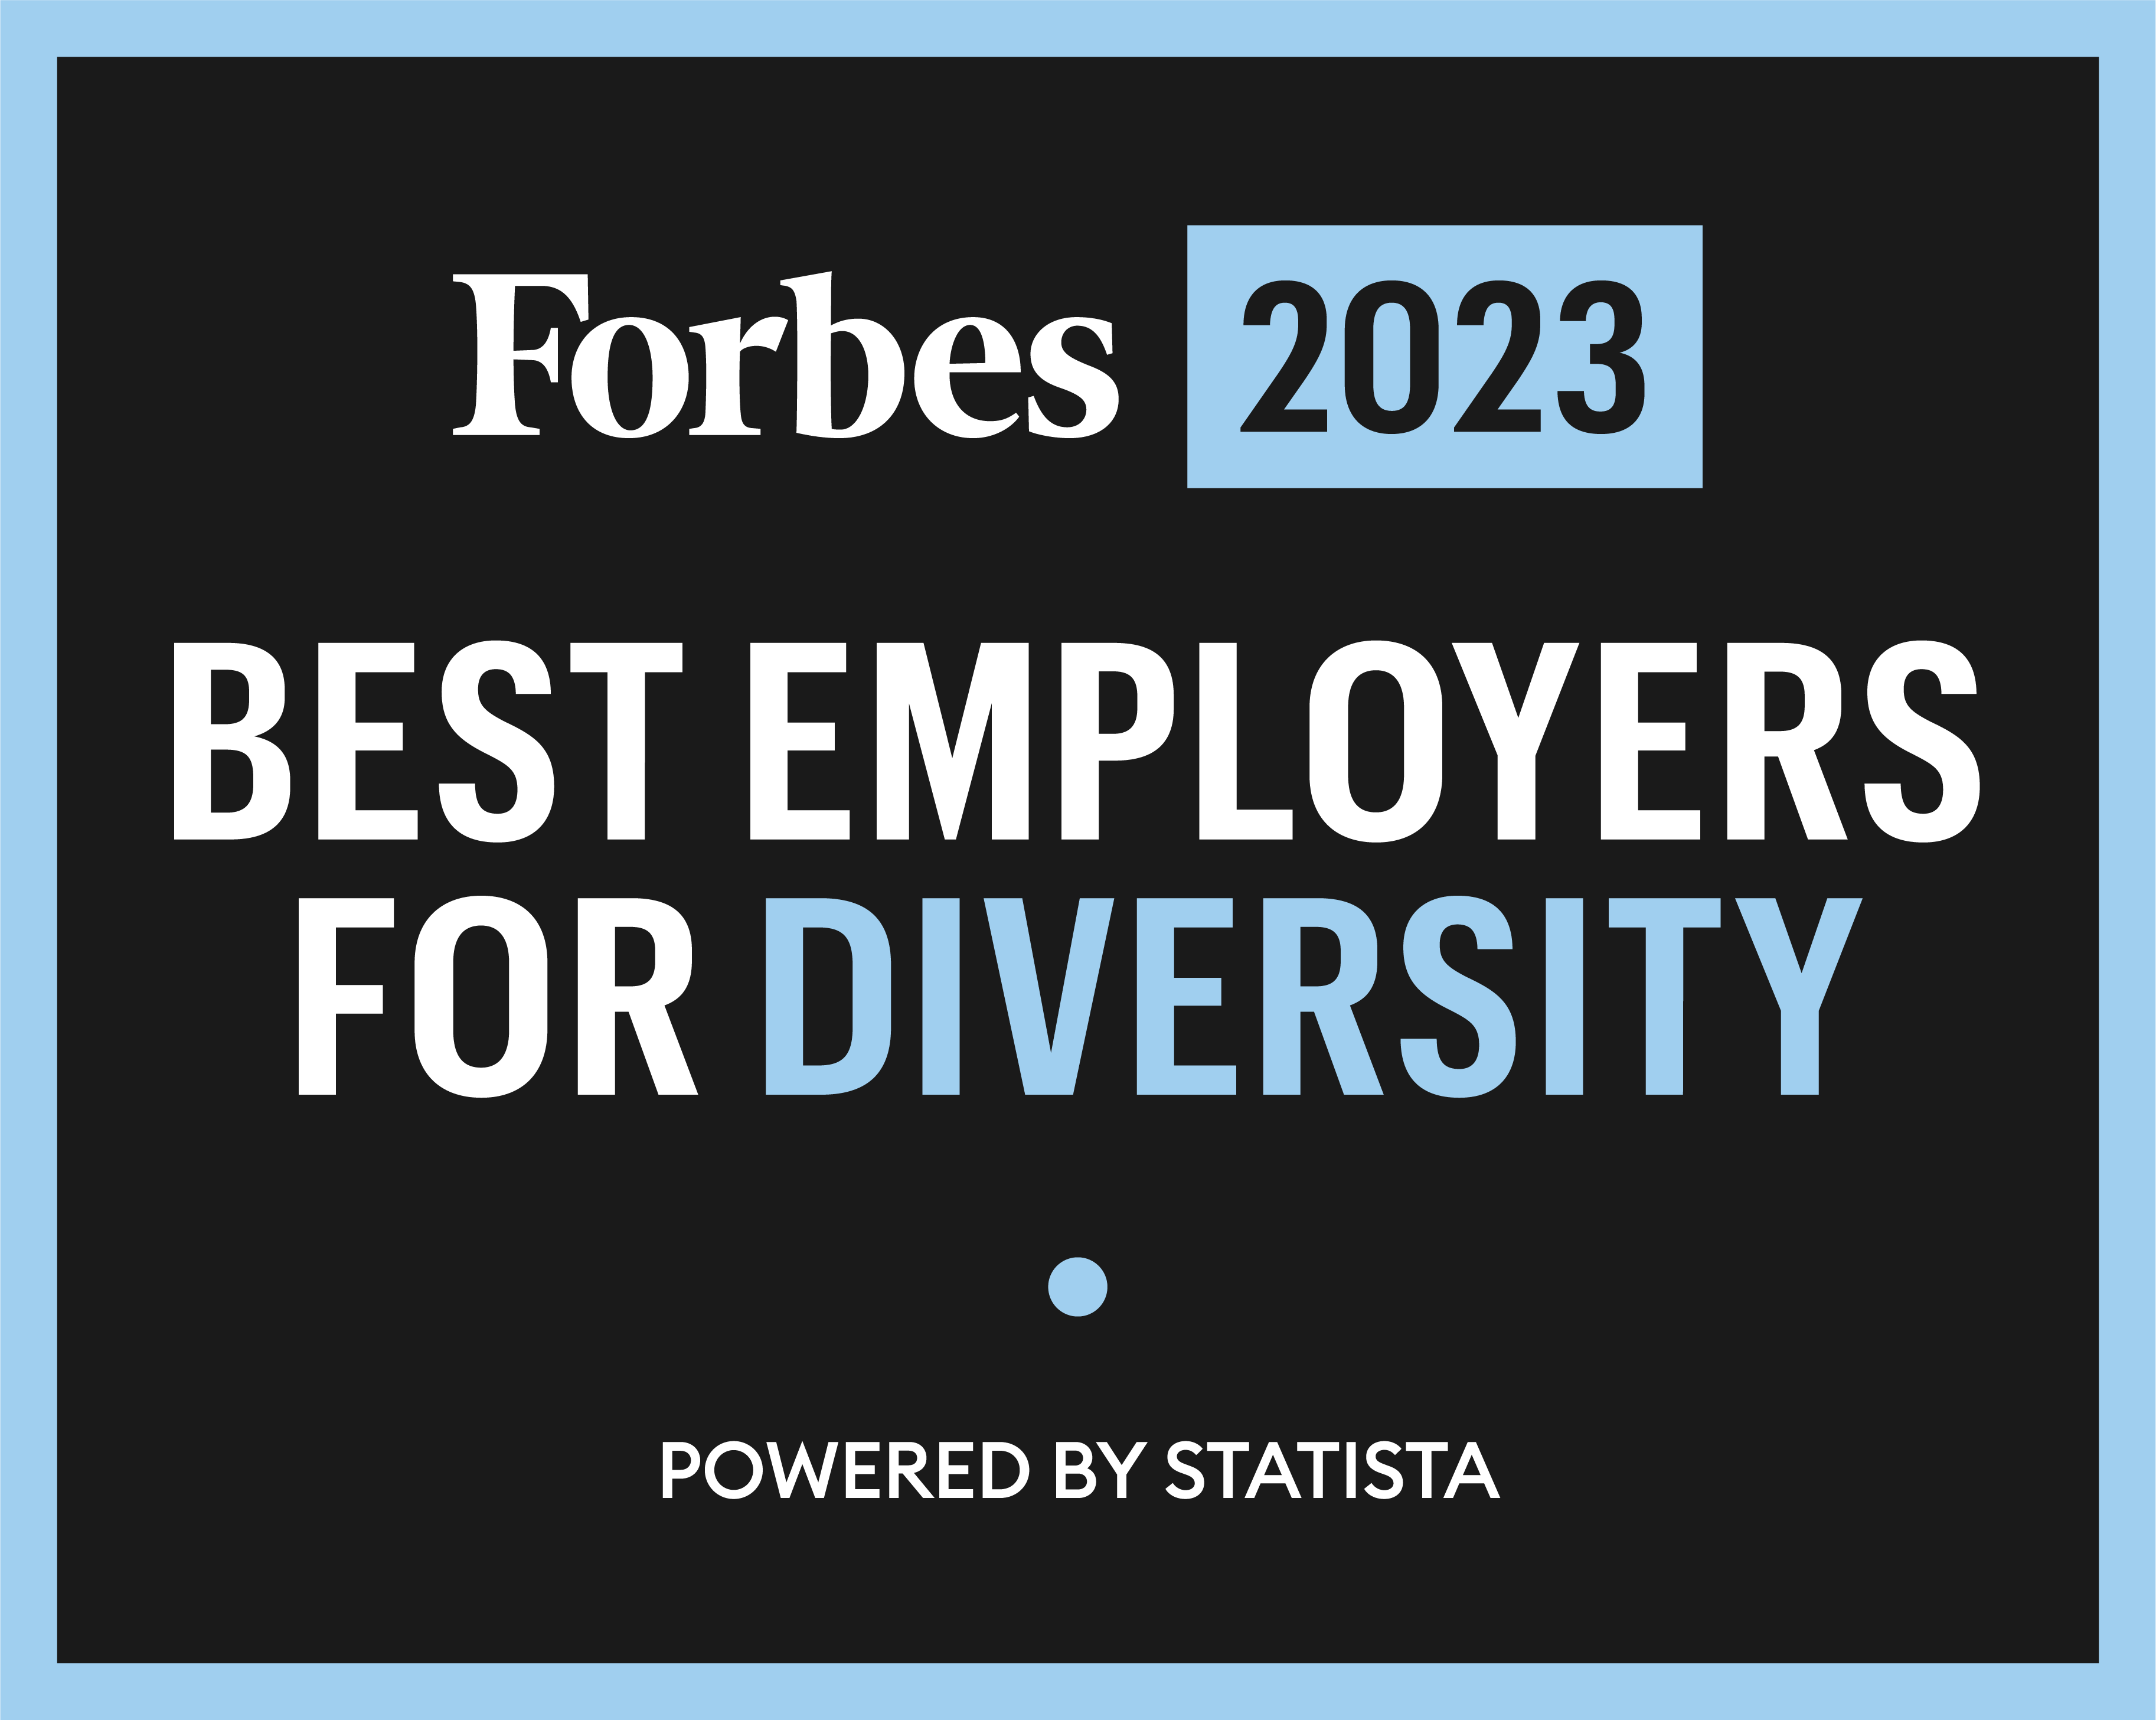 2023 Forbes Award: Best Employers for Diversity